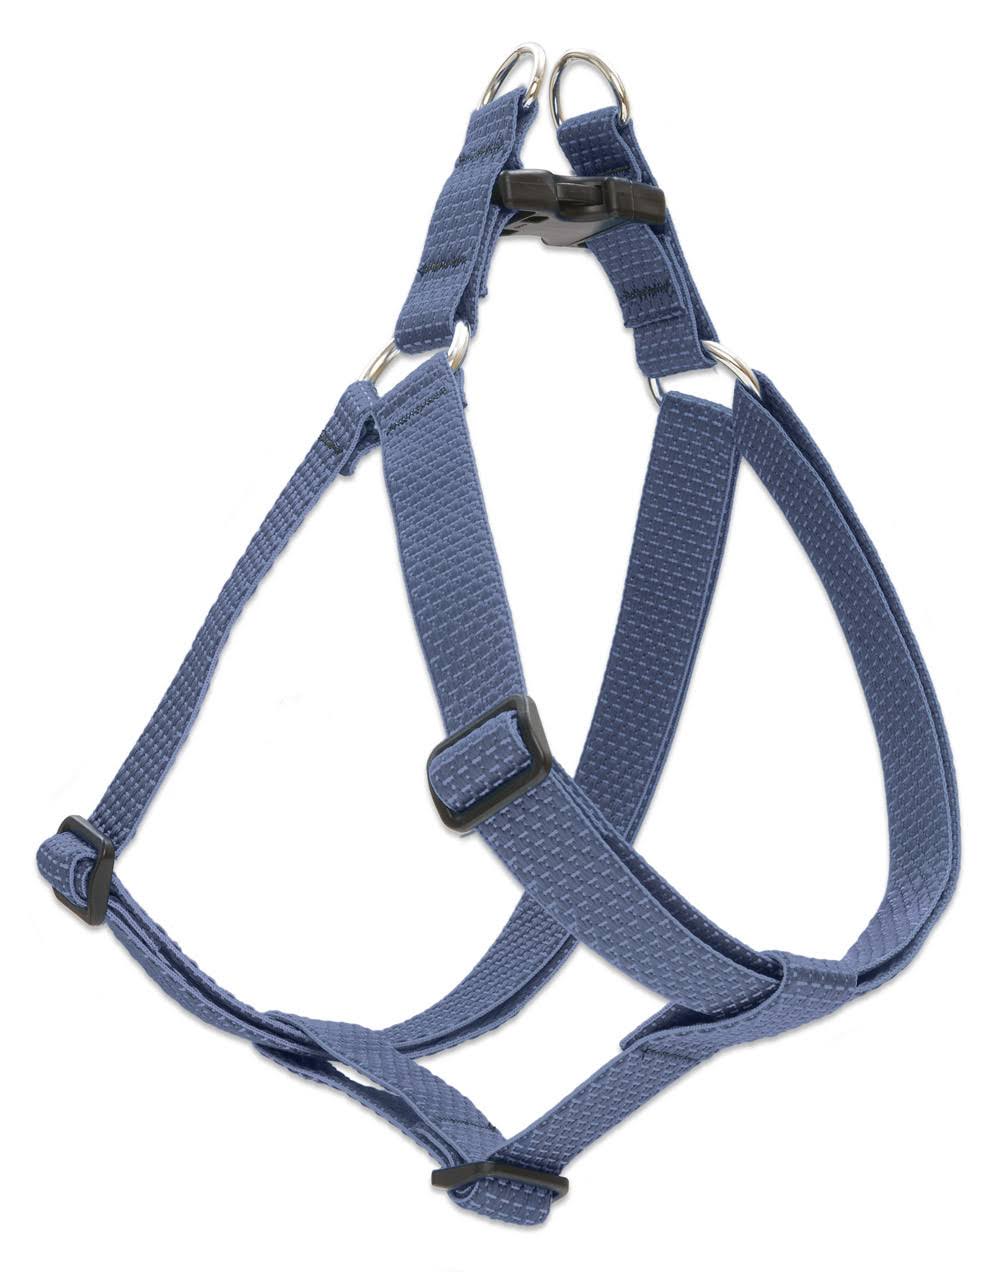 LupinePet Eco 3/4" Mountain Lake 15-21" Step in Harness for Small Dogs